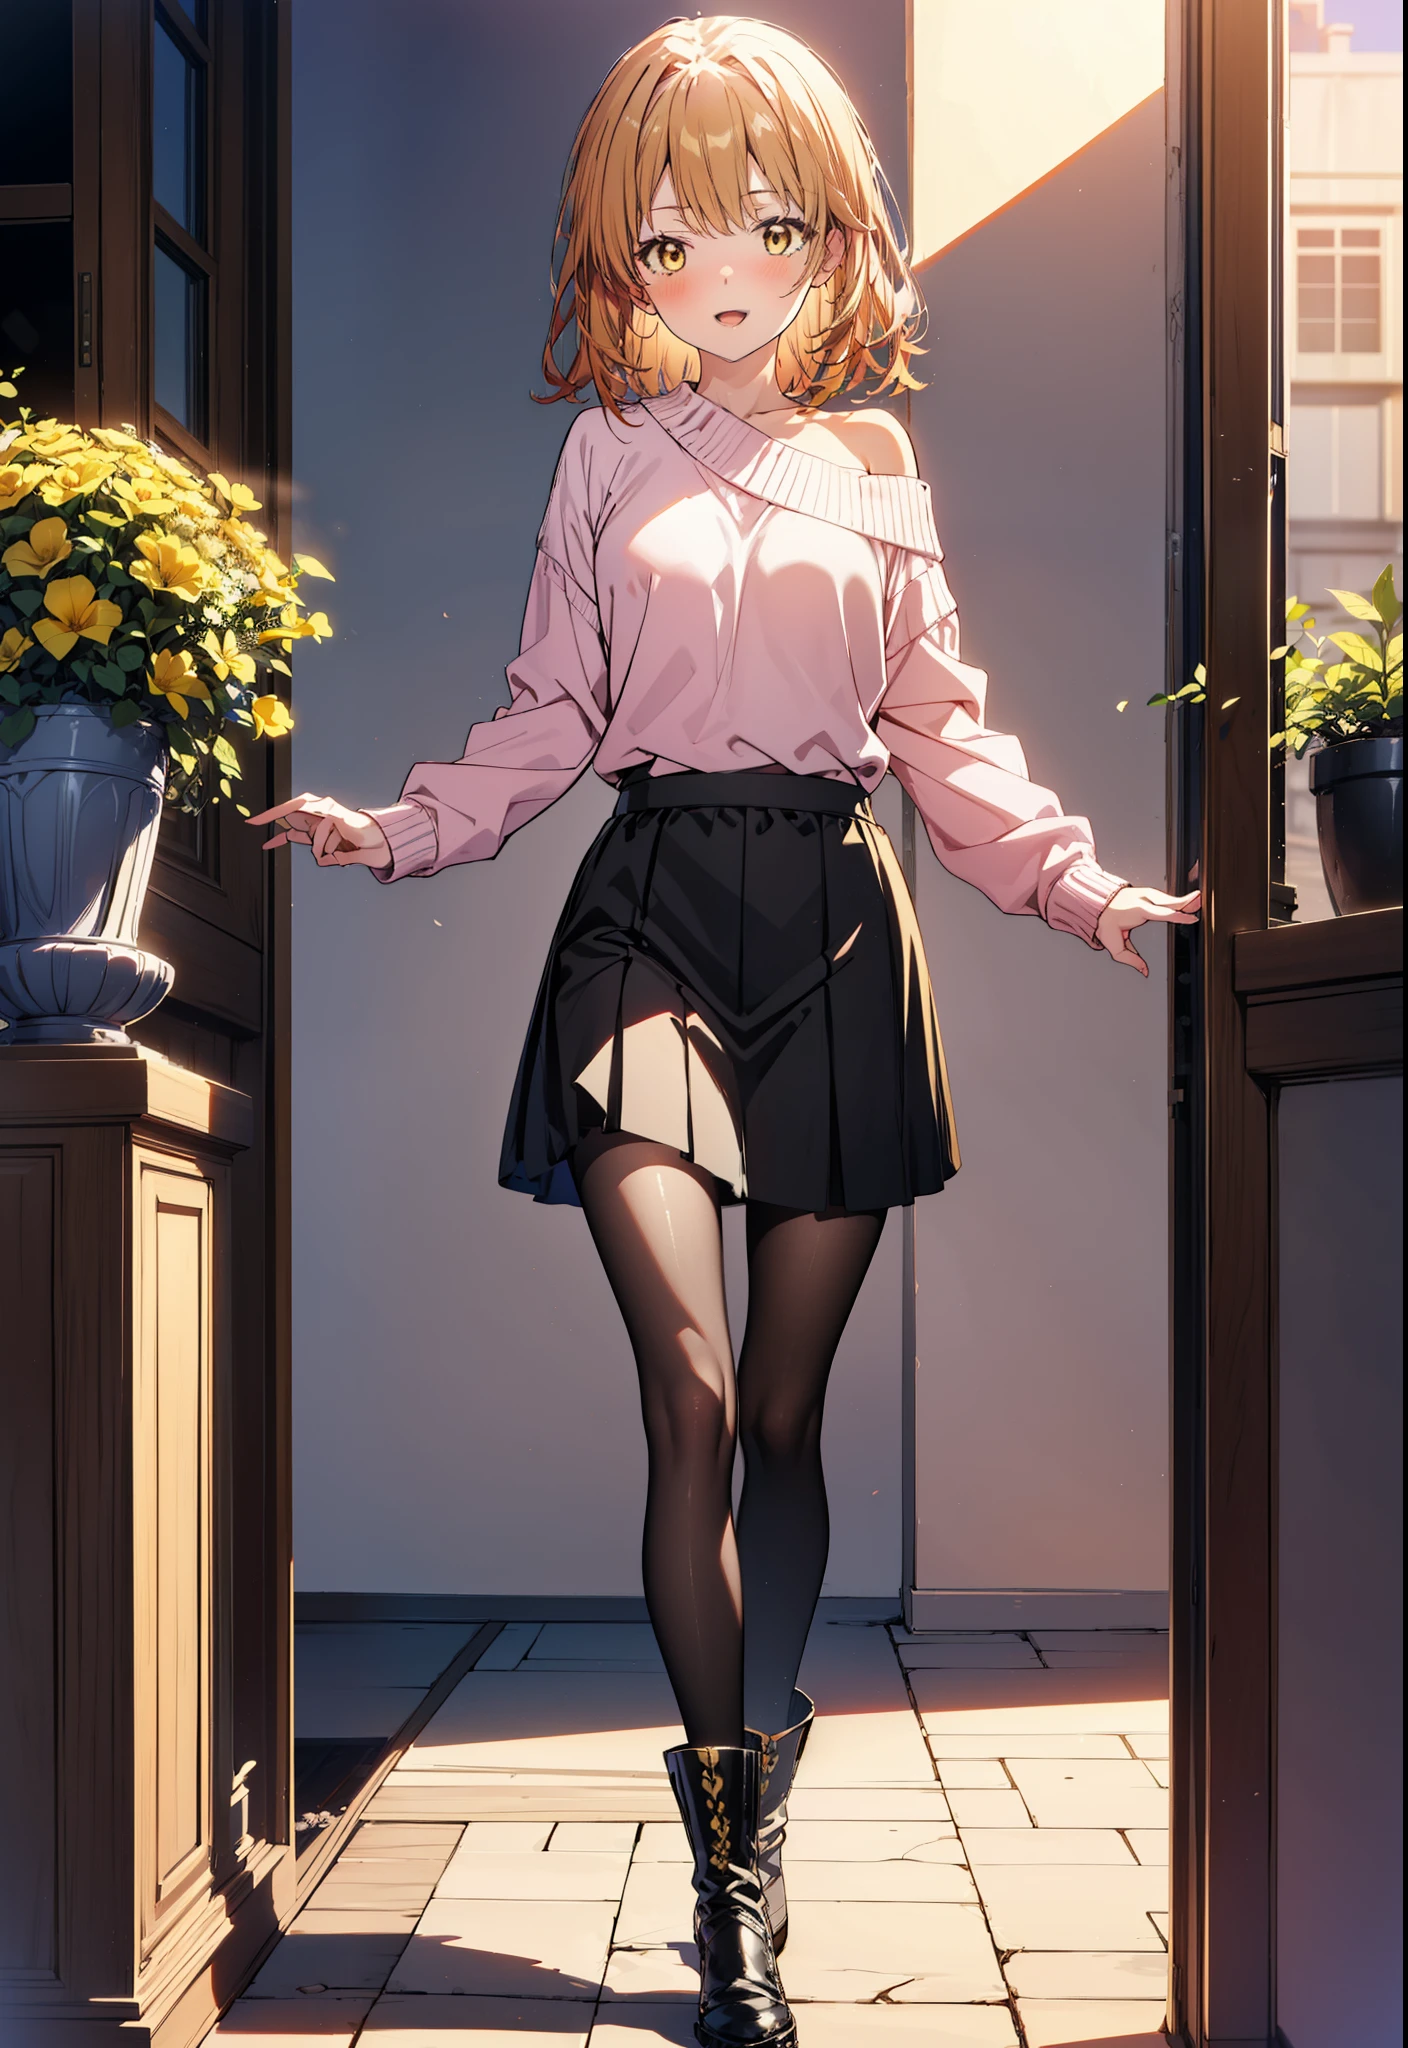 irohaisshiki, iroha isshiki, Long Hair, Brown Hair, (Brown eyes:1.5), happy smile, smile, Open your mouth,Yellow one-shoulder sweater,Black long skirt,Black Pantyhose,short boots,morning,morning陽,The sun is rising,whole bodyがイラストに入るように,walk,
break outdoors, balcony,Balcony, terrace, balcony, Embankment, Huge, Potted plants, Flowers in a vase,
break looking at viewer,whole body,
break (masterpiece:1.2), highest quality, High resolution, unity 8k wallpaper, (shape:0.8), (Beautiful details:1.6), Highly detailed face, Perfect lighting, Extremely detailed CG, (Perfect hands, Perfect Anatomy),